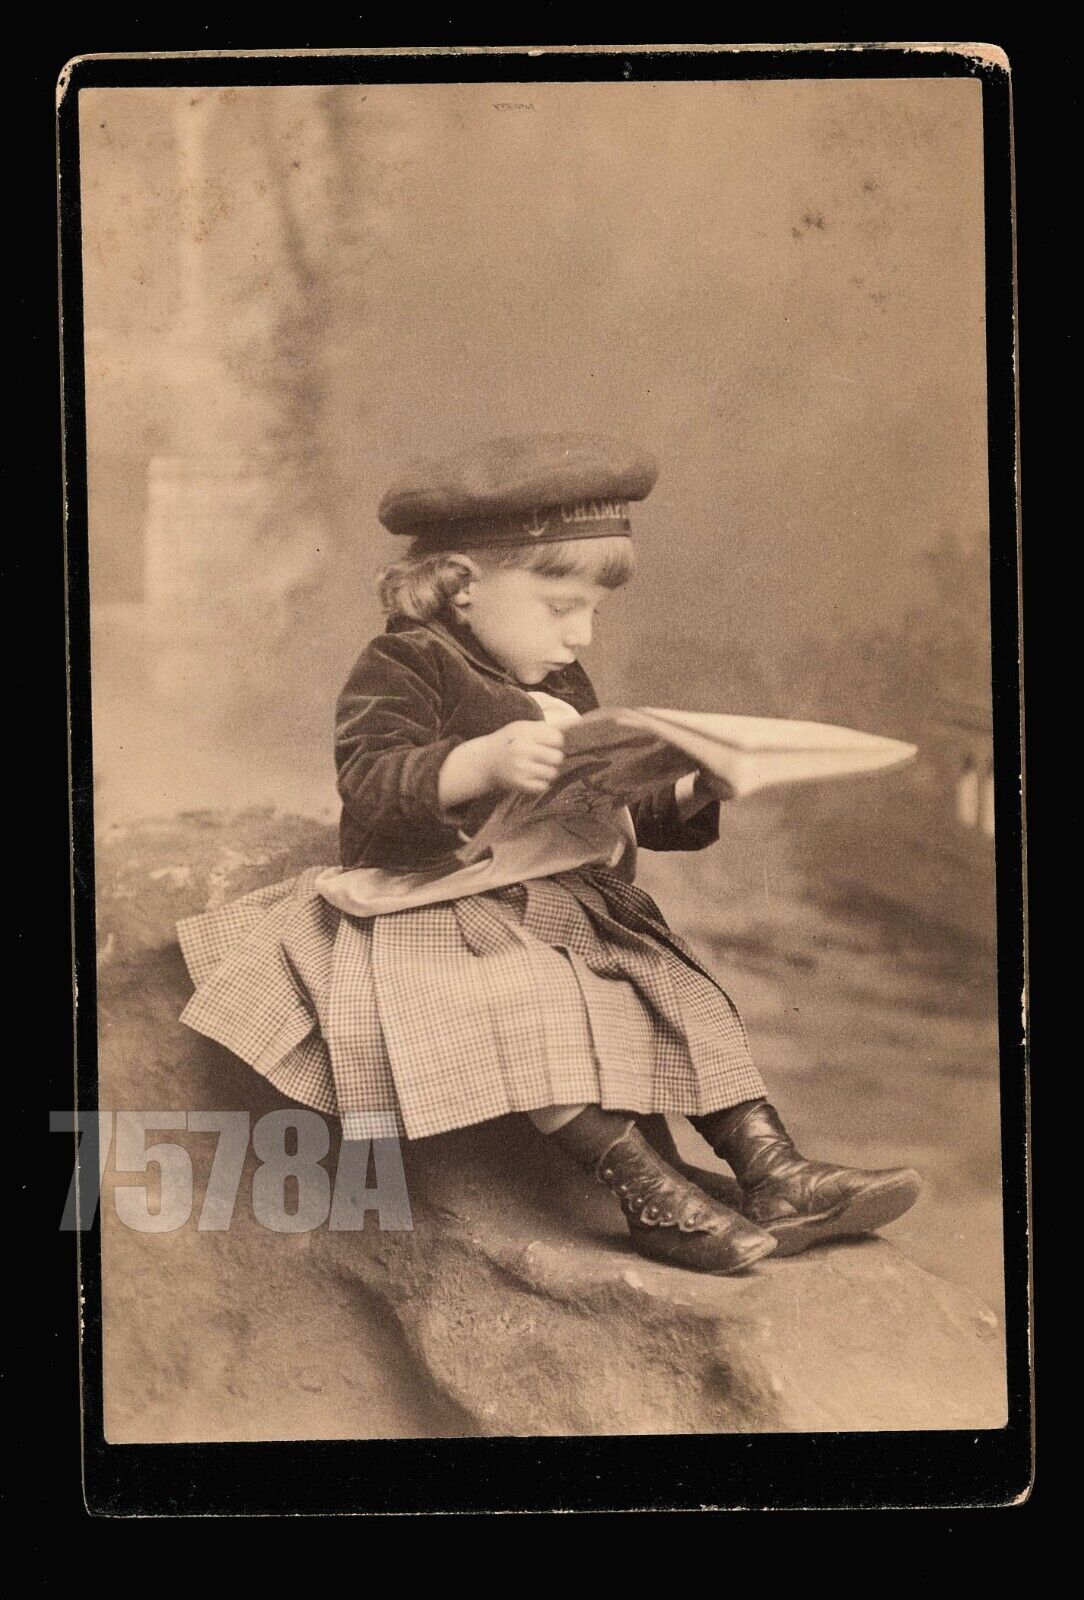 Cute Funny Cabinet Card Photo Girl Reading Newspaper NYC Photographer's Daughter